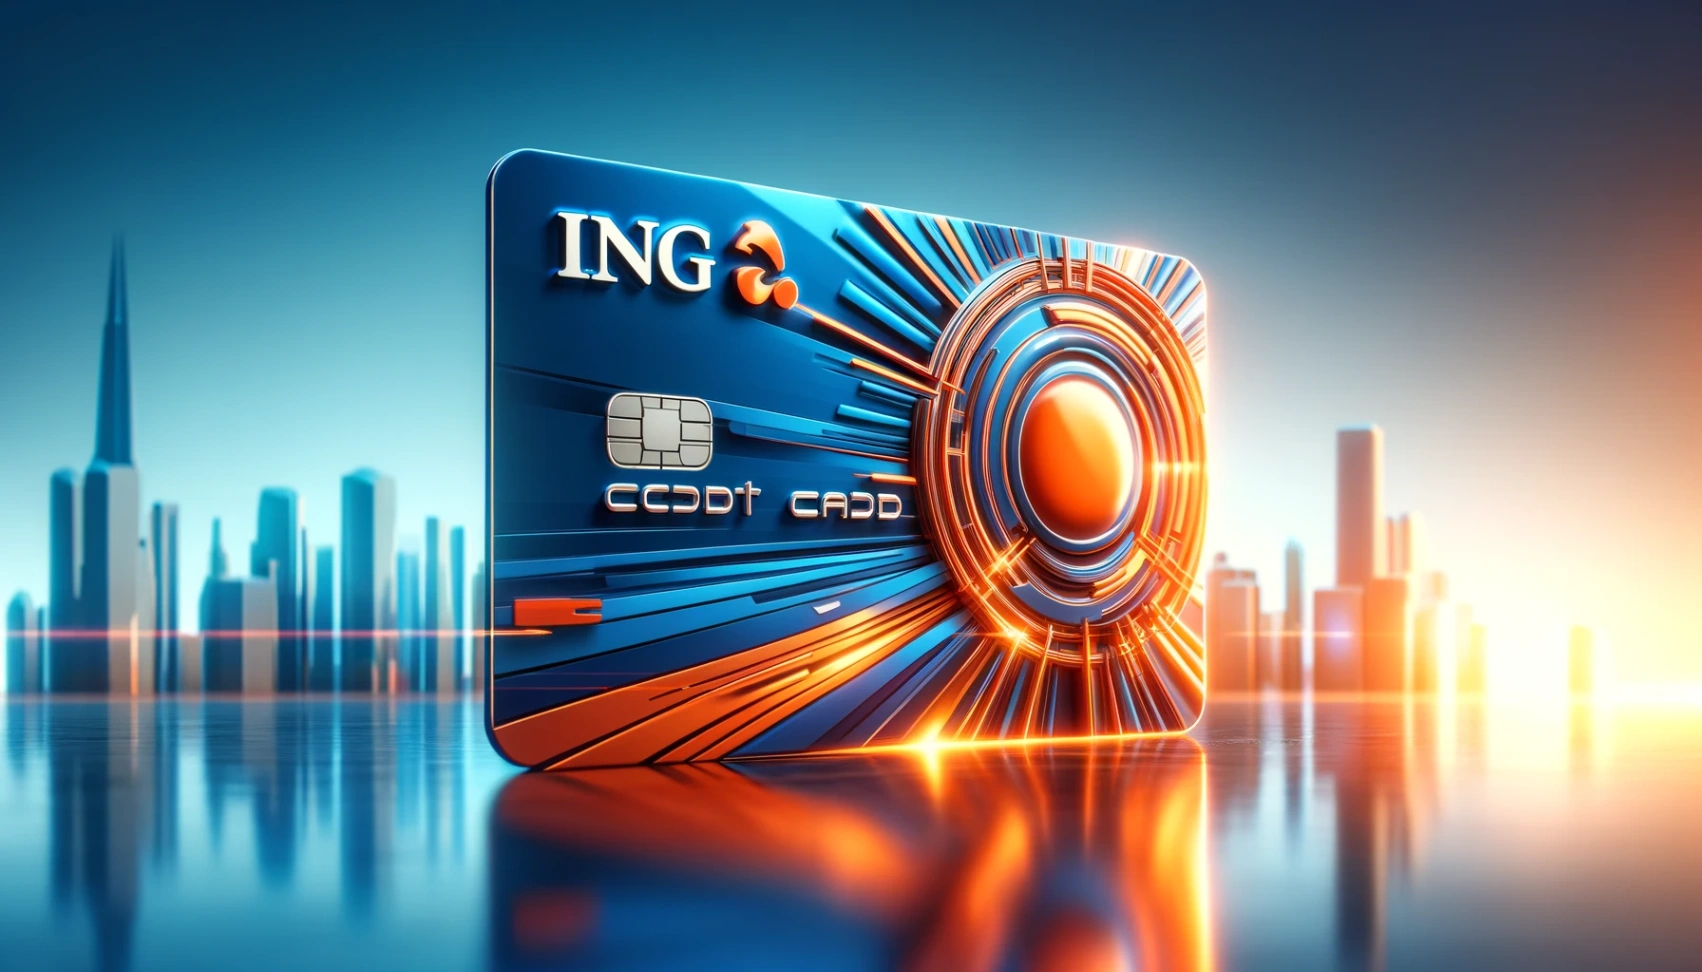 ING Credit Card: Your Online Application Guide